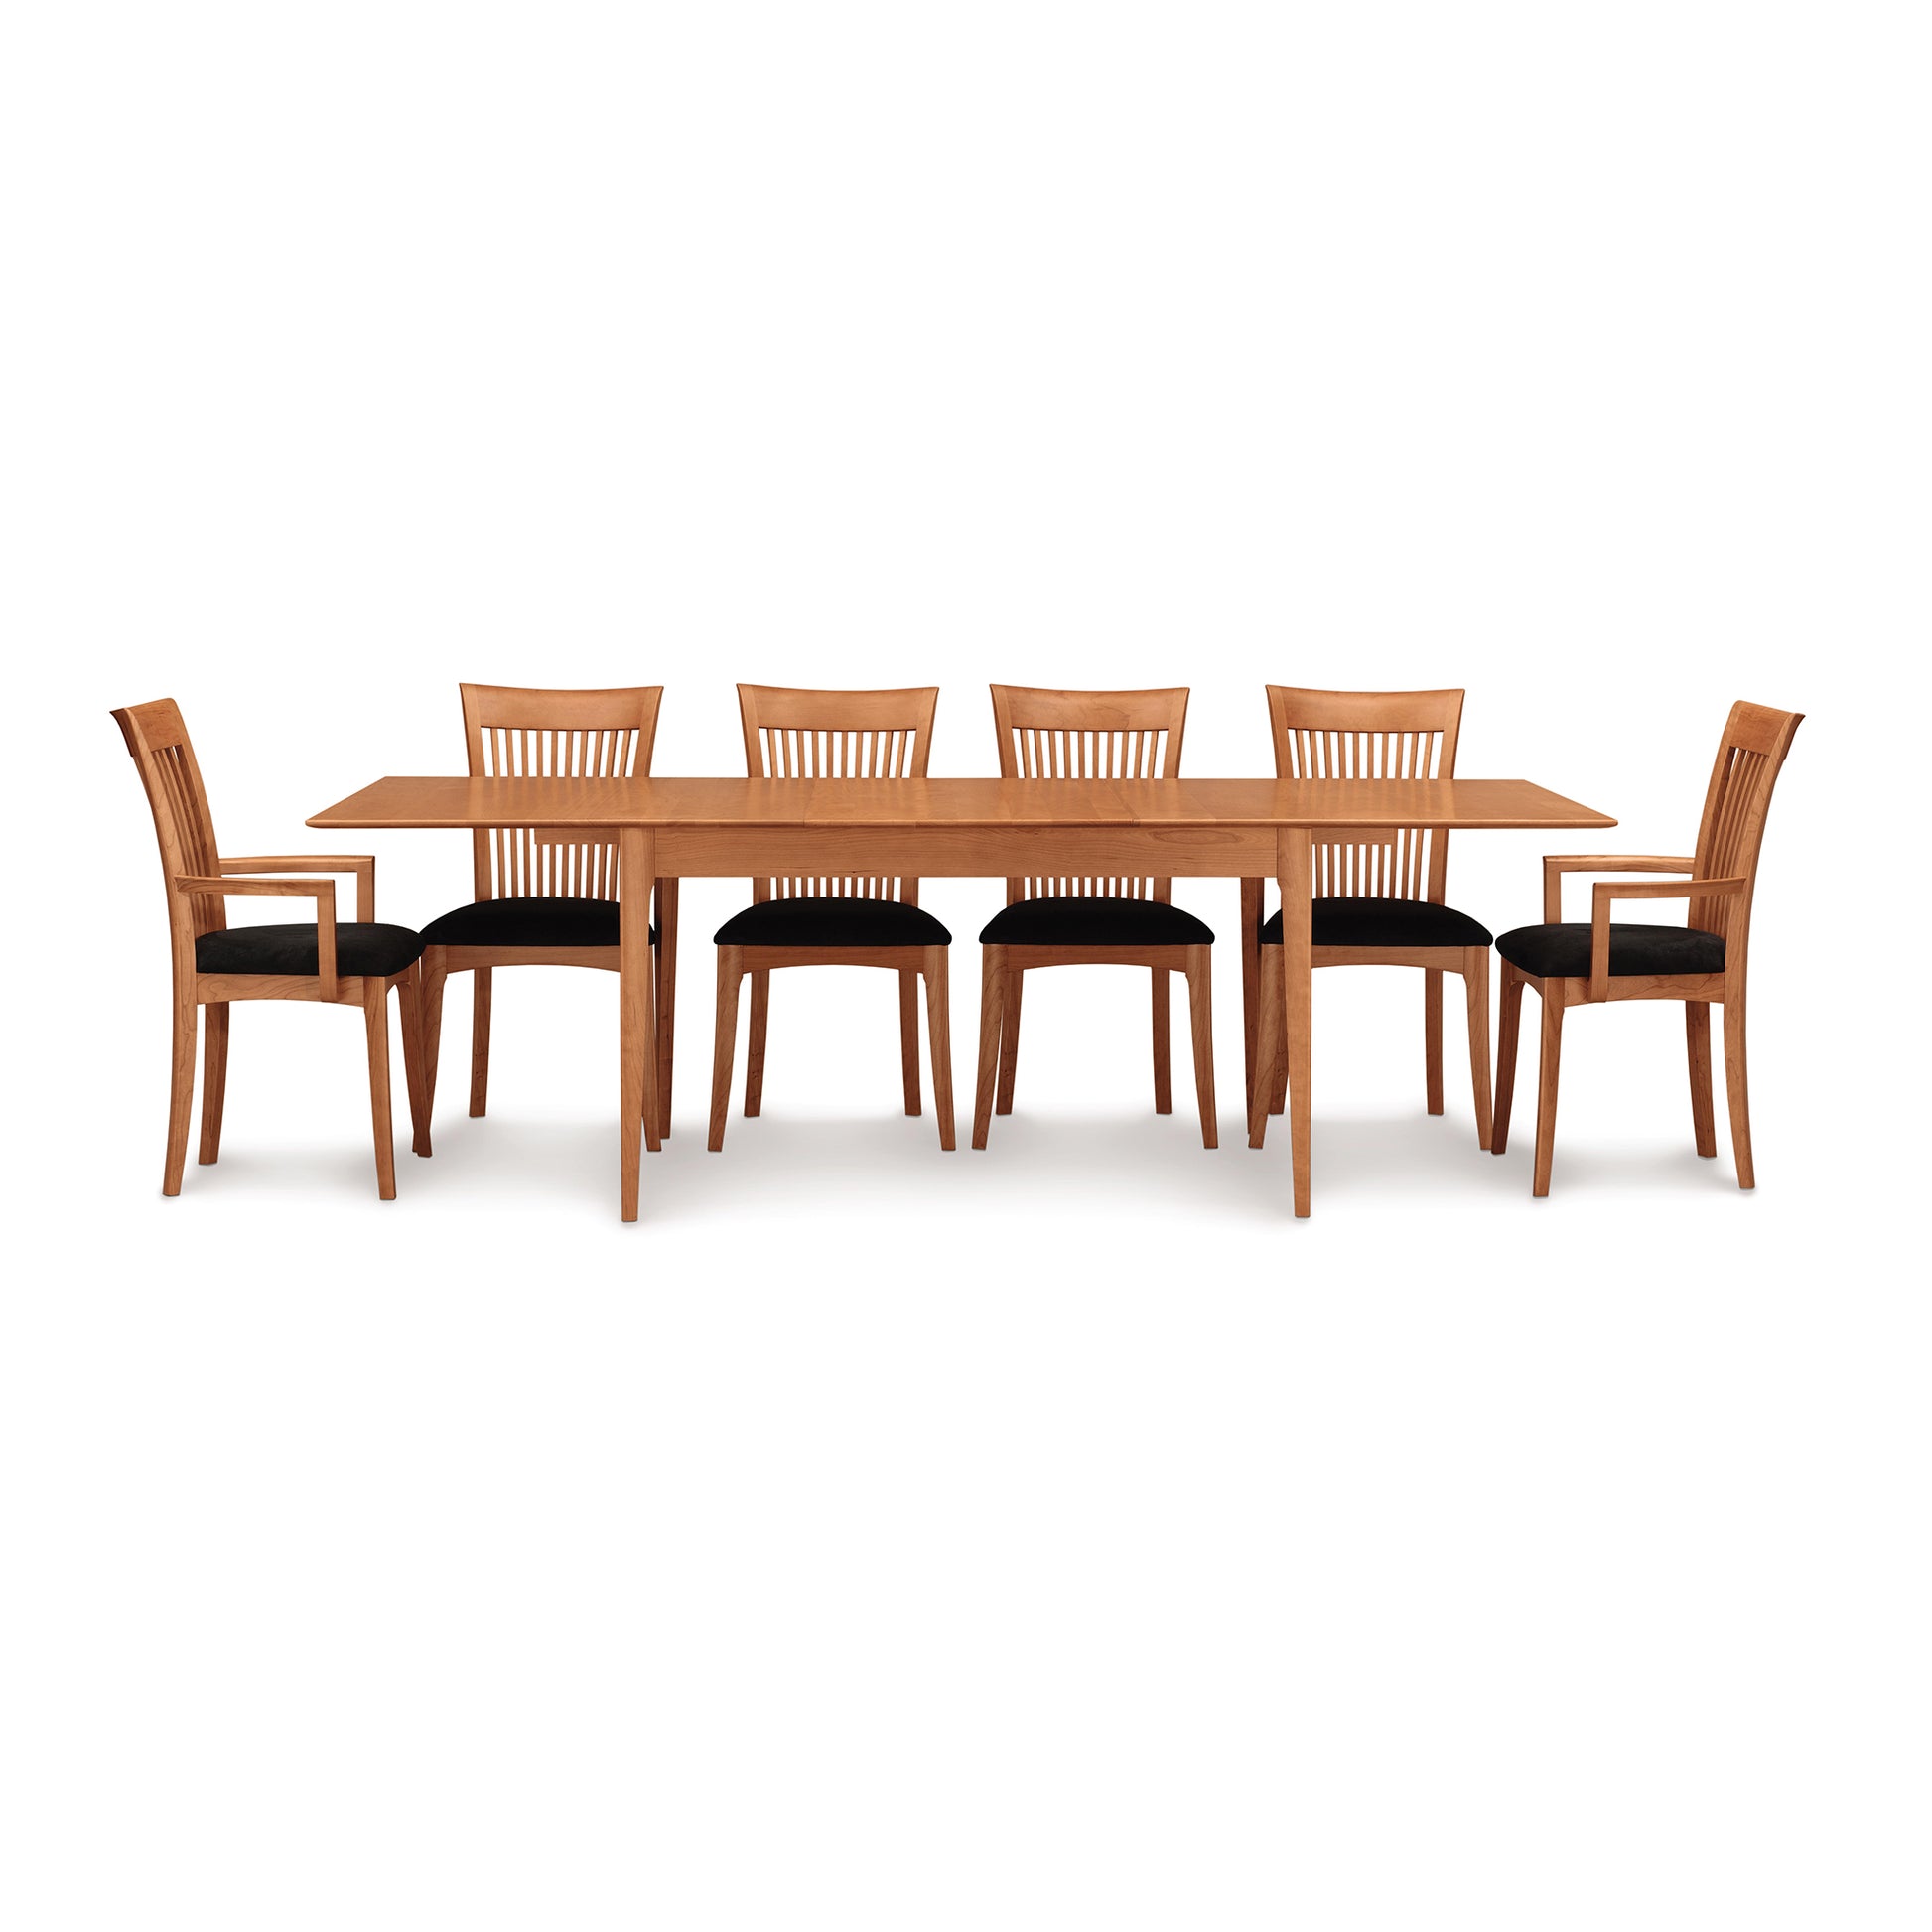 A set of USA made wooden dining furniture from the Copeland Furniture Sarah Shaker dining room collection, including one Sarah Shaker Tapered Leg Extension Table and six chairs arranged on a white background.